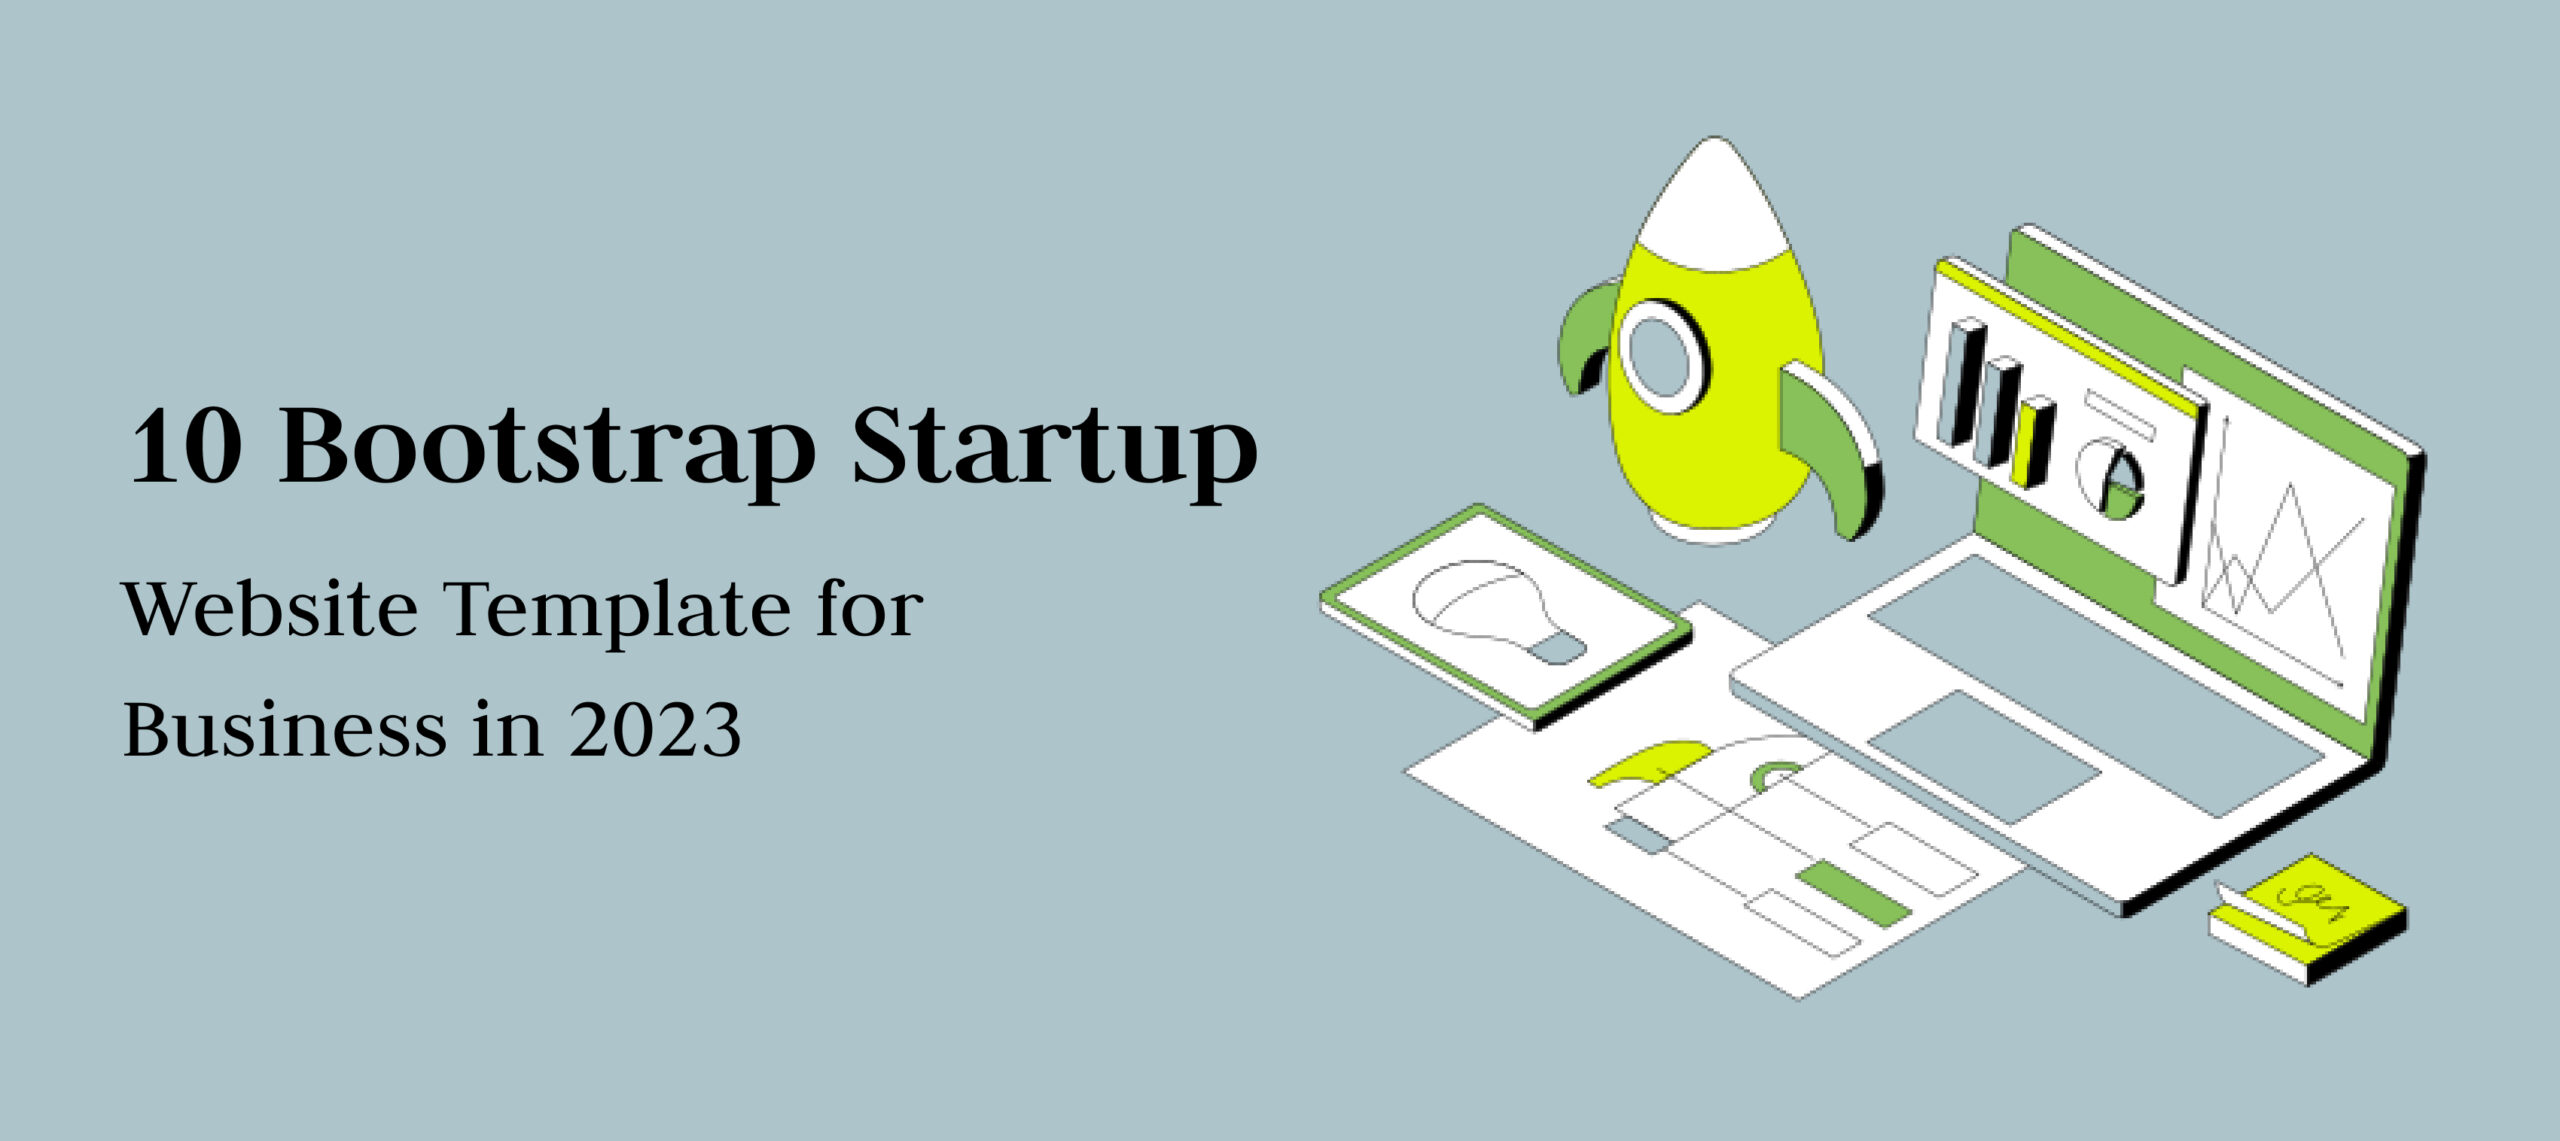  10 Bootstrap Startup Website Template for Your Business